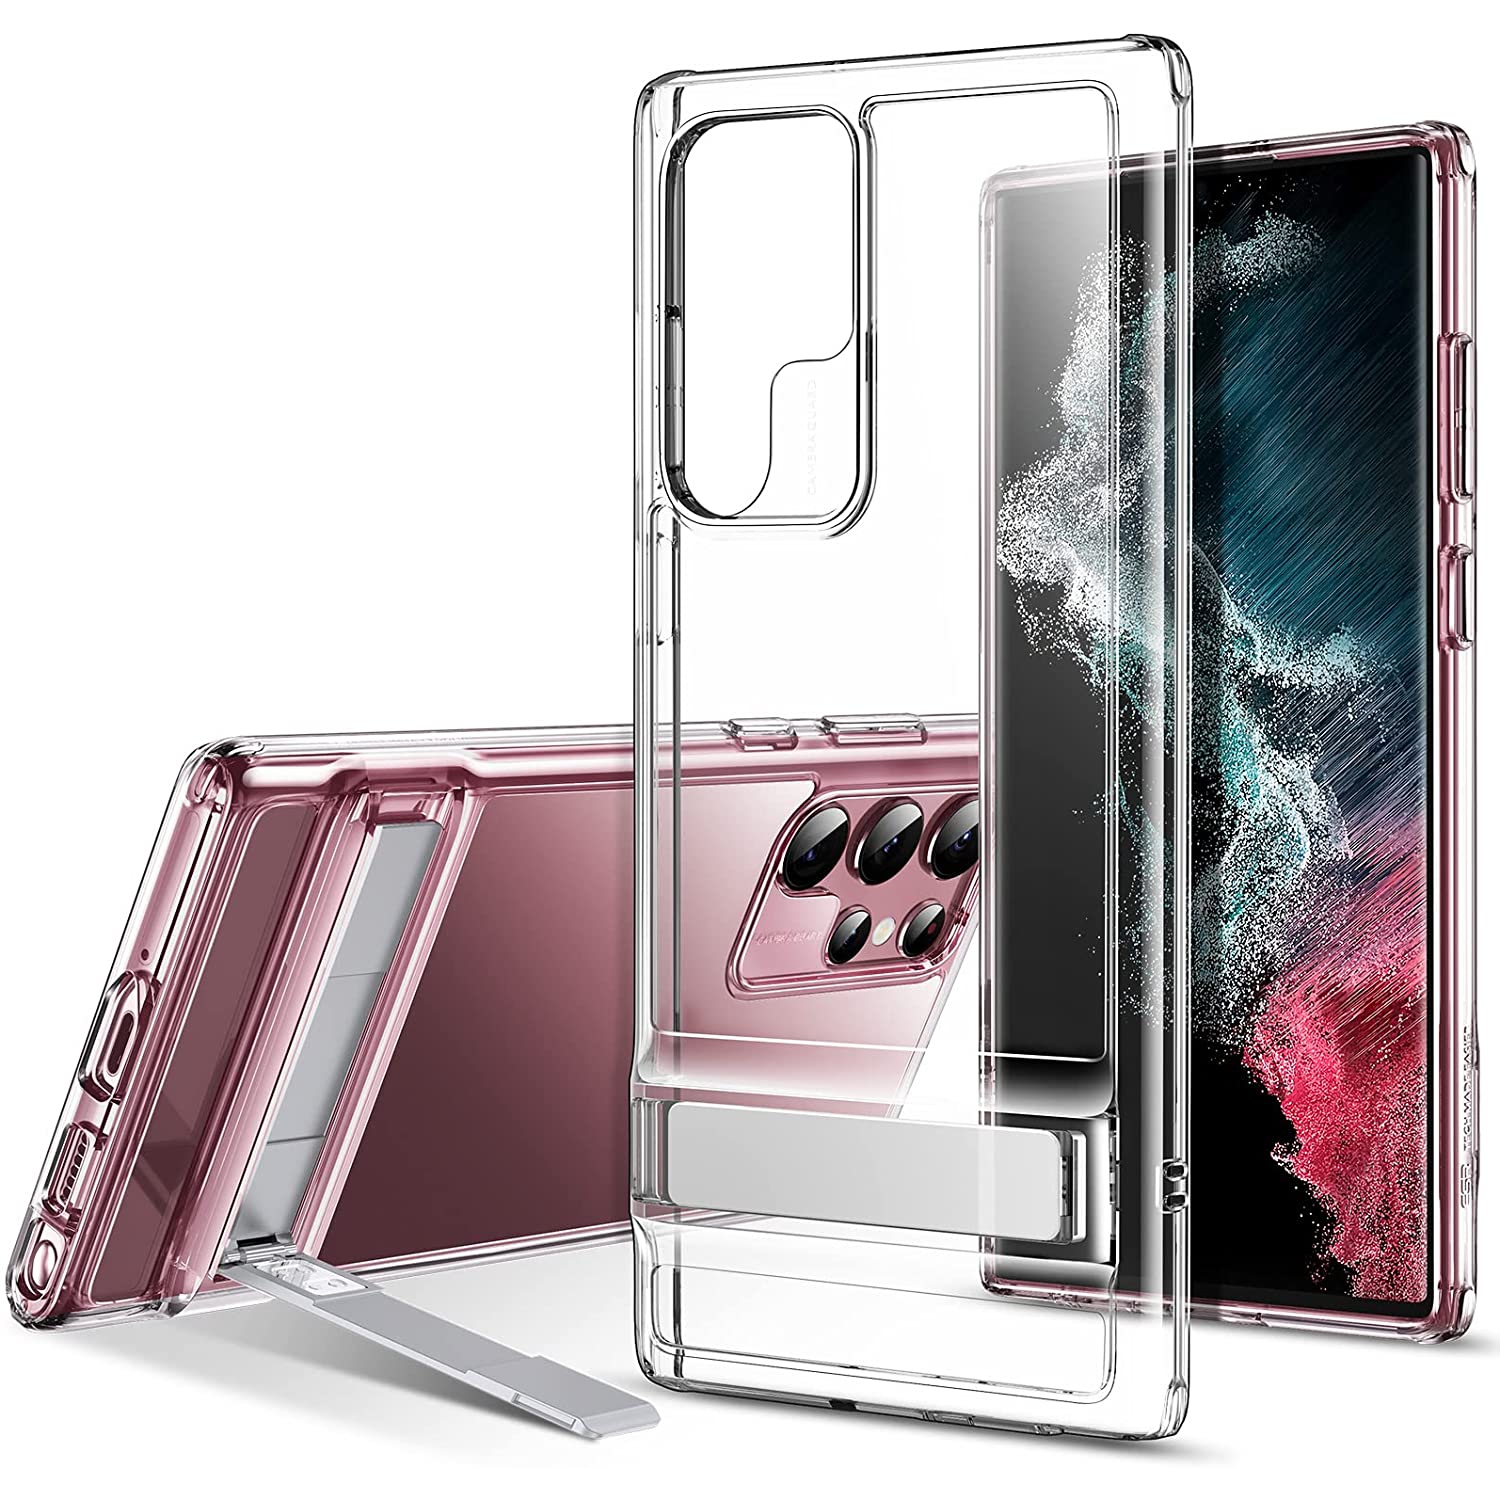 Metal Kickstand Compatible with Samsung Galaxy S22 Ultra Case (6.8 Inch) (2022), Versatile Patented Kickstand, Crystal Clear Scratch-Resistant Back Cover, Clear